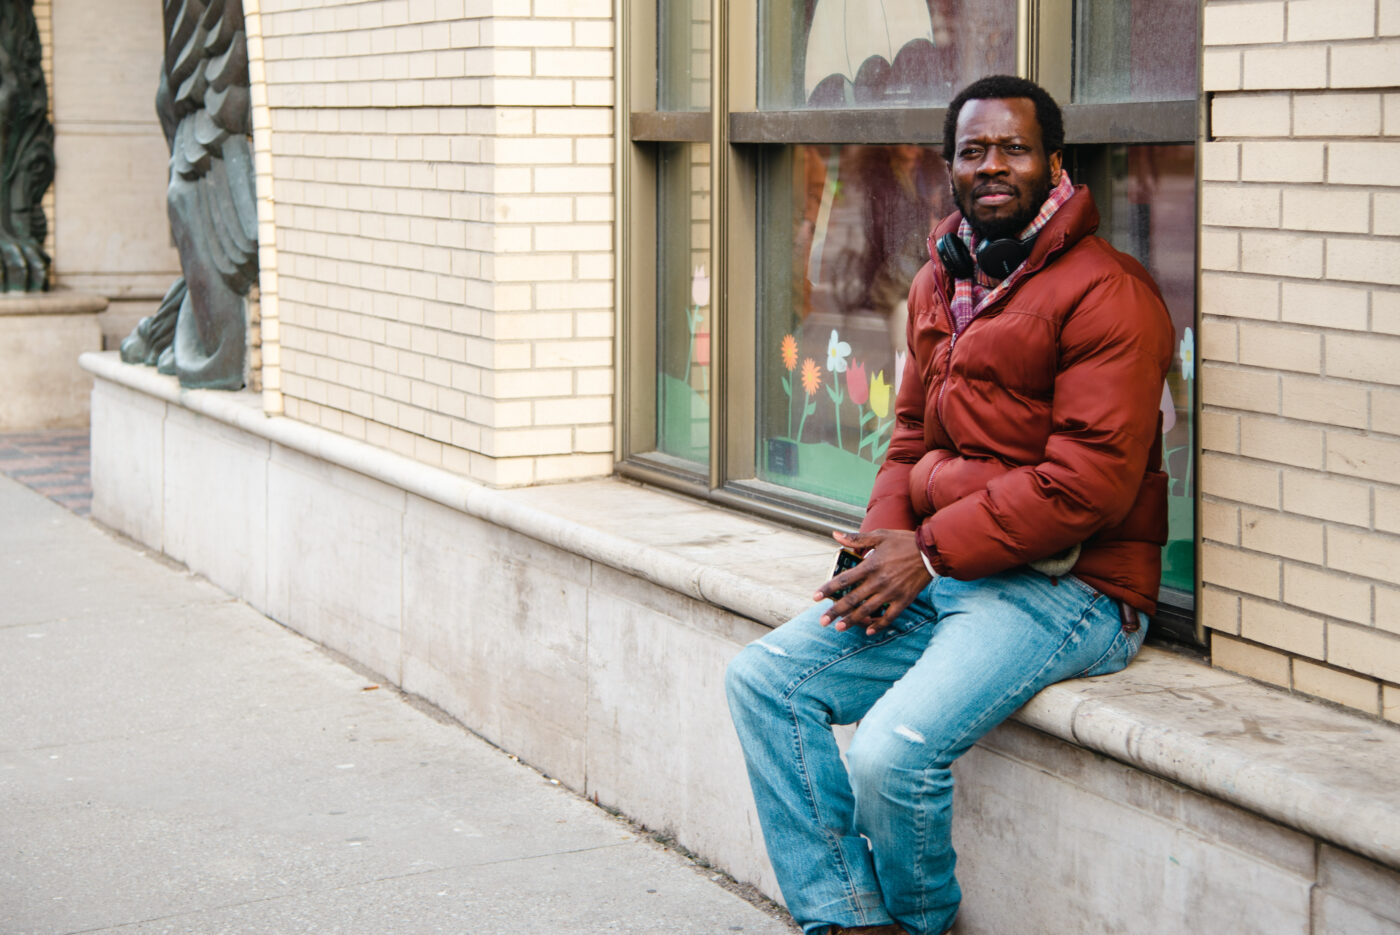 Olivier M. sits outside the Lillian H. Smith library at 239 College St., where he frequently spent time when he was homeless.